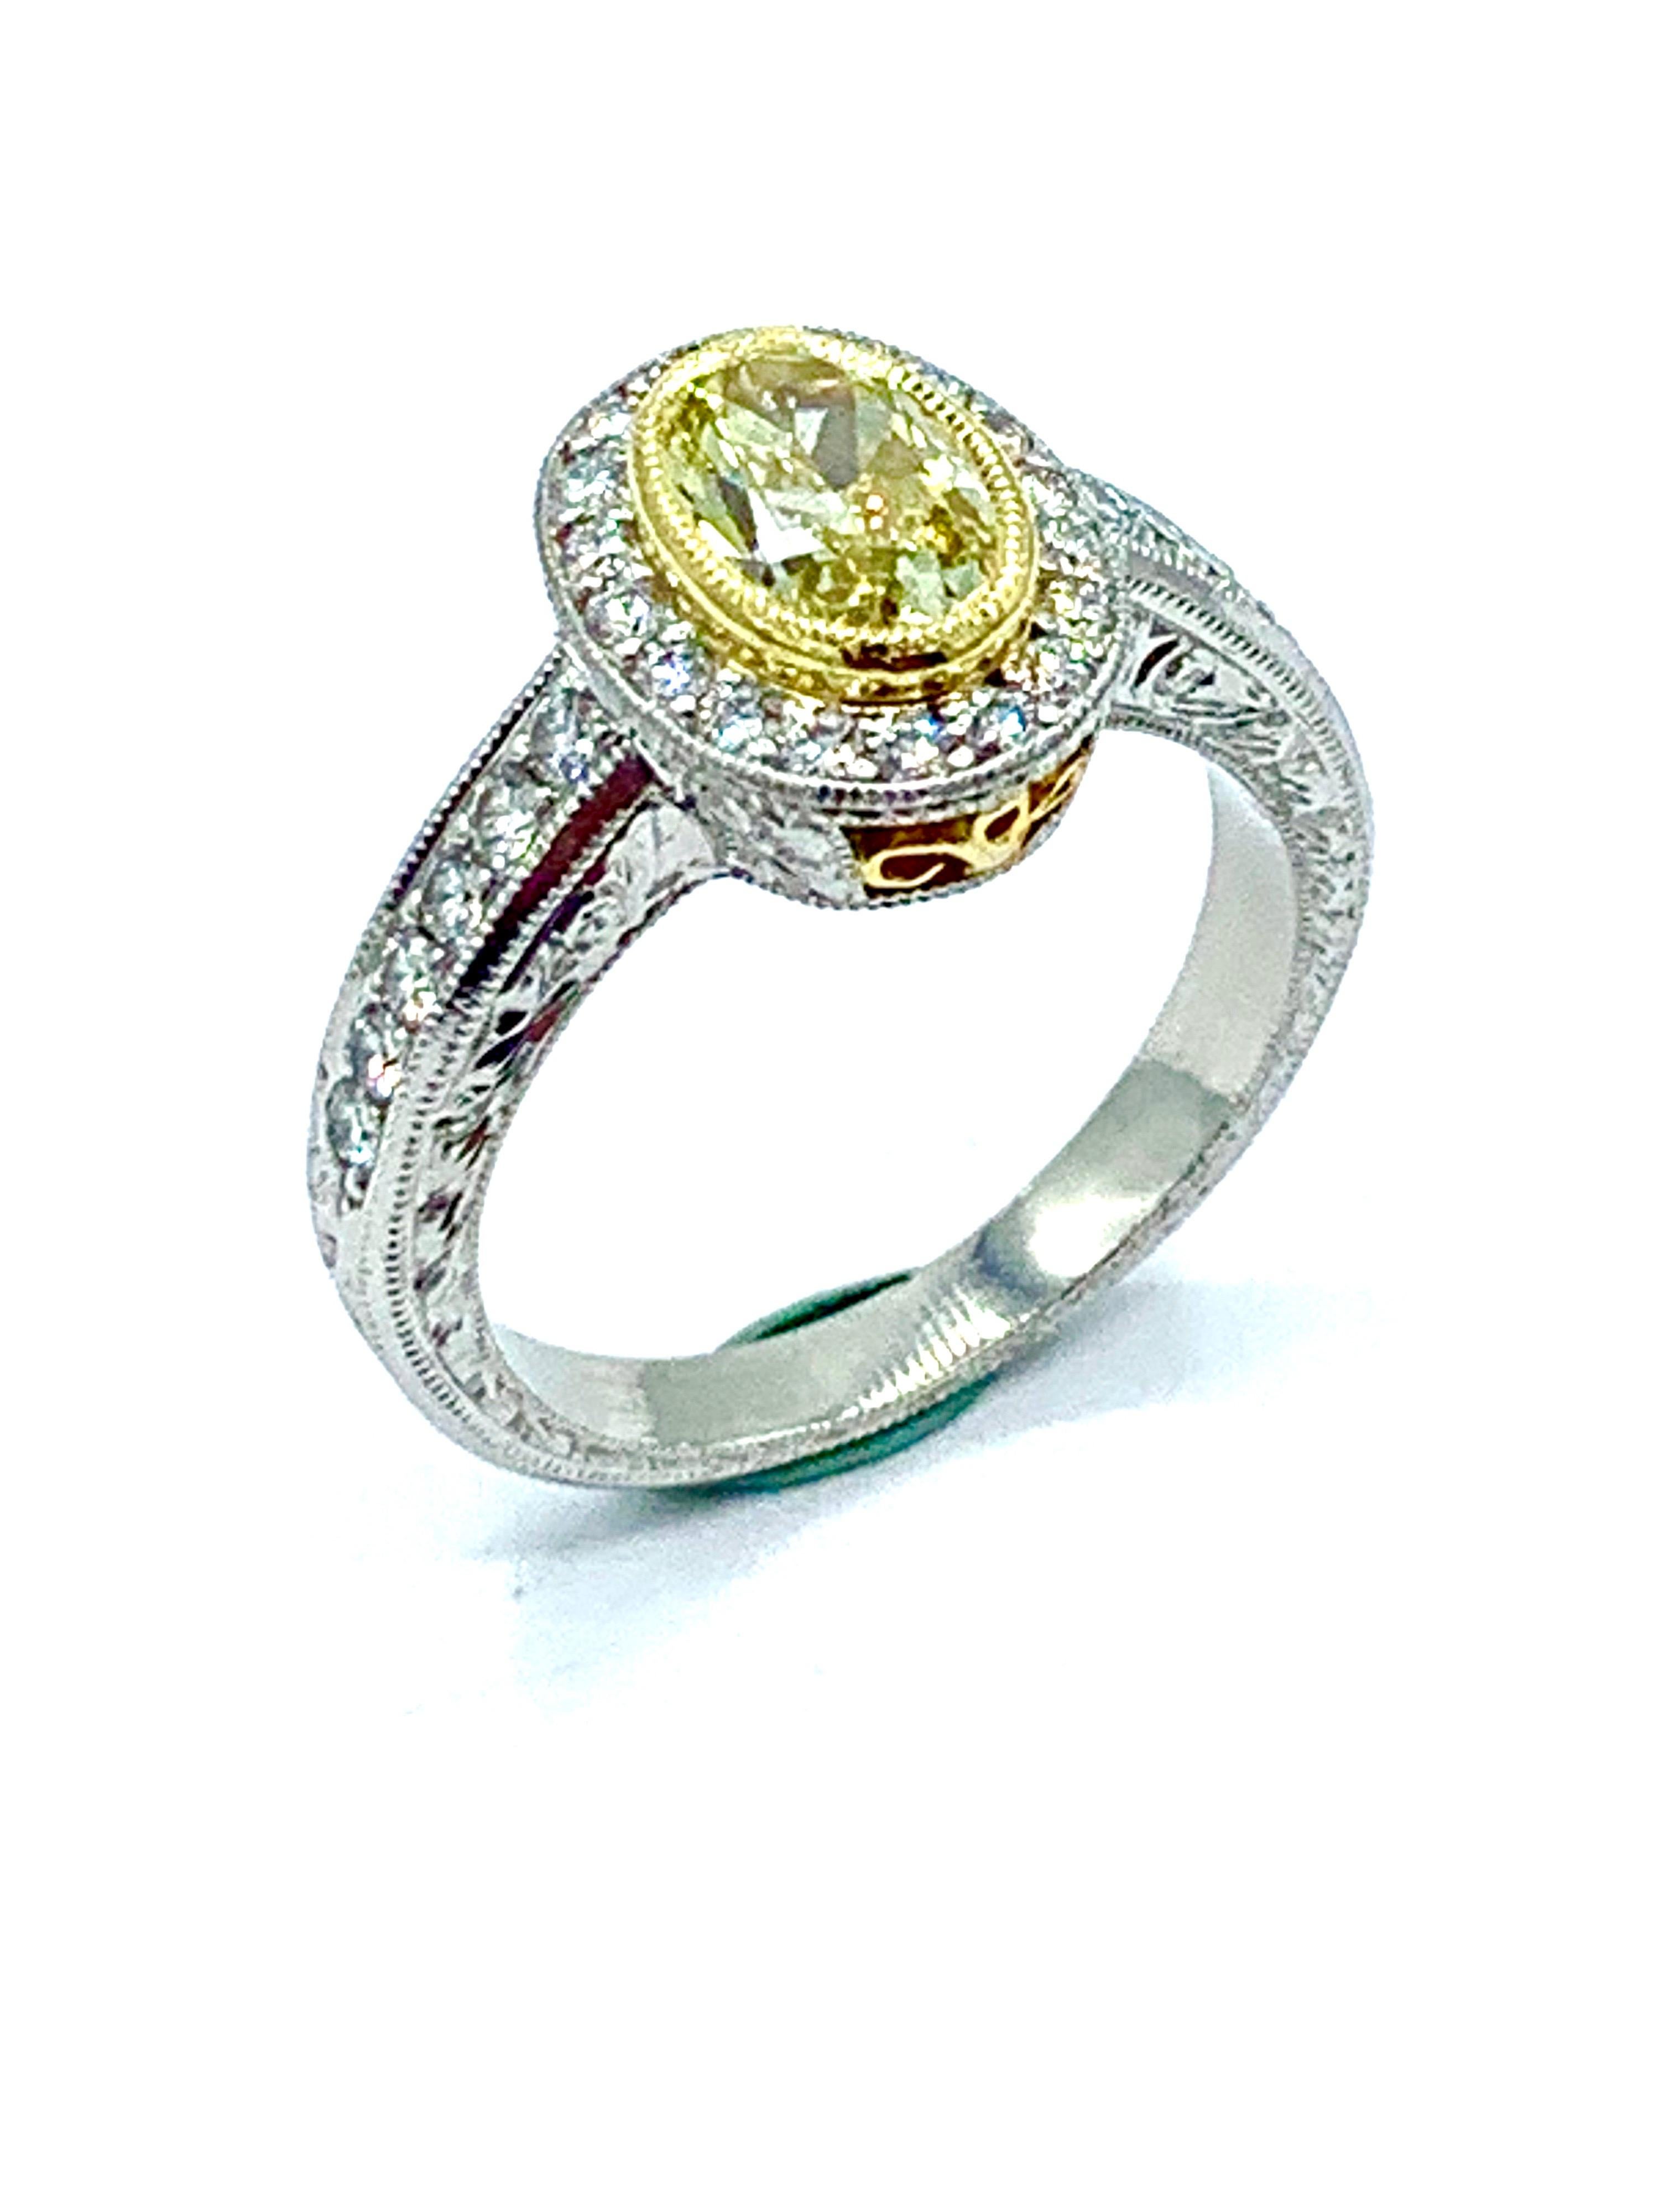 A stunning handcrafted 1.00 carat fancy yellow oval Diamond engagement ring.  The oval is bezel set in 18K yellow gold, surrounded by a single row of round brilliant white Diamonds set in platinum, with a Diamond platinum half shank.  The gallery of